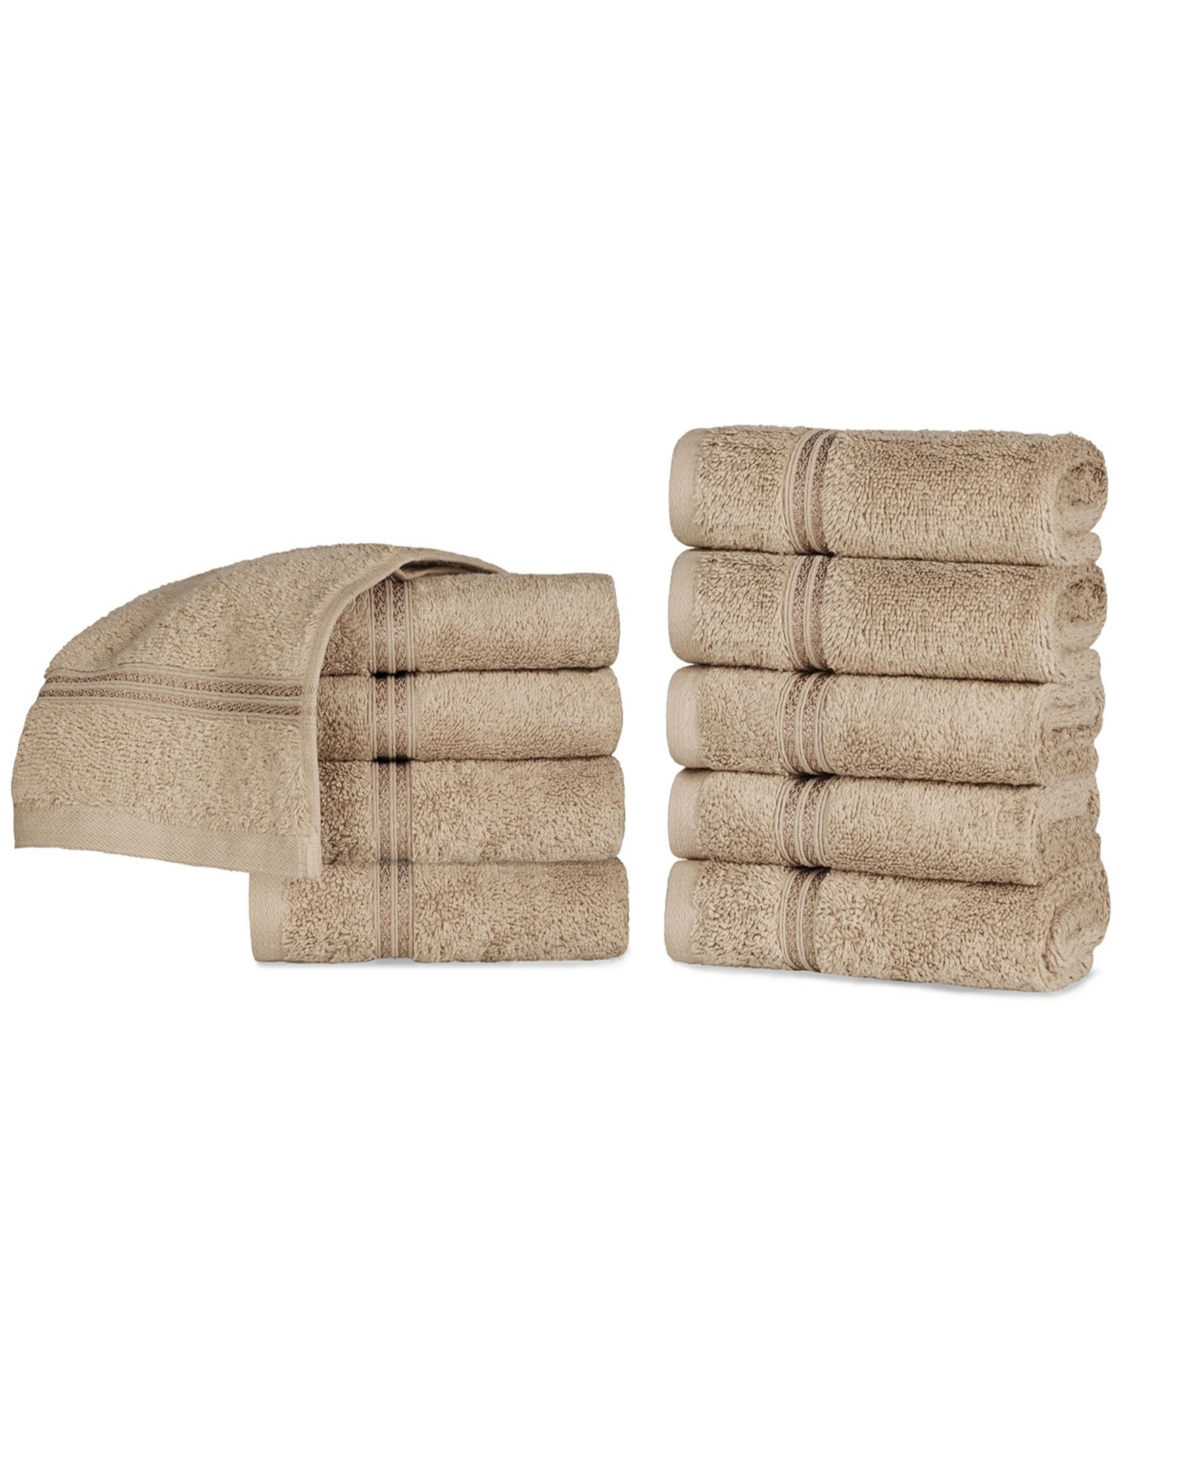 Superior Solid Quick Drying Absorbent 10 Piece Egyptian Cotton Face Towel Set Bedding In Taupe